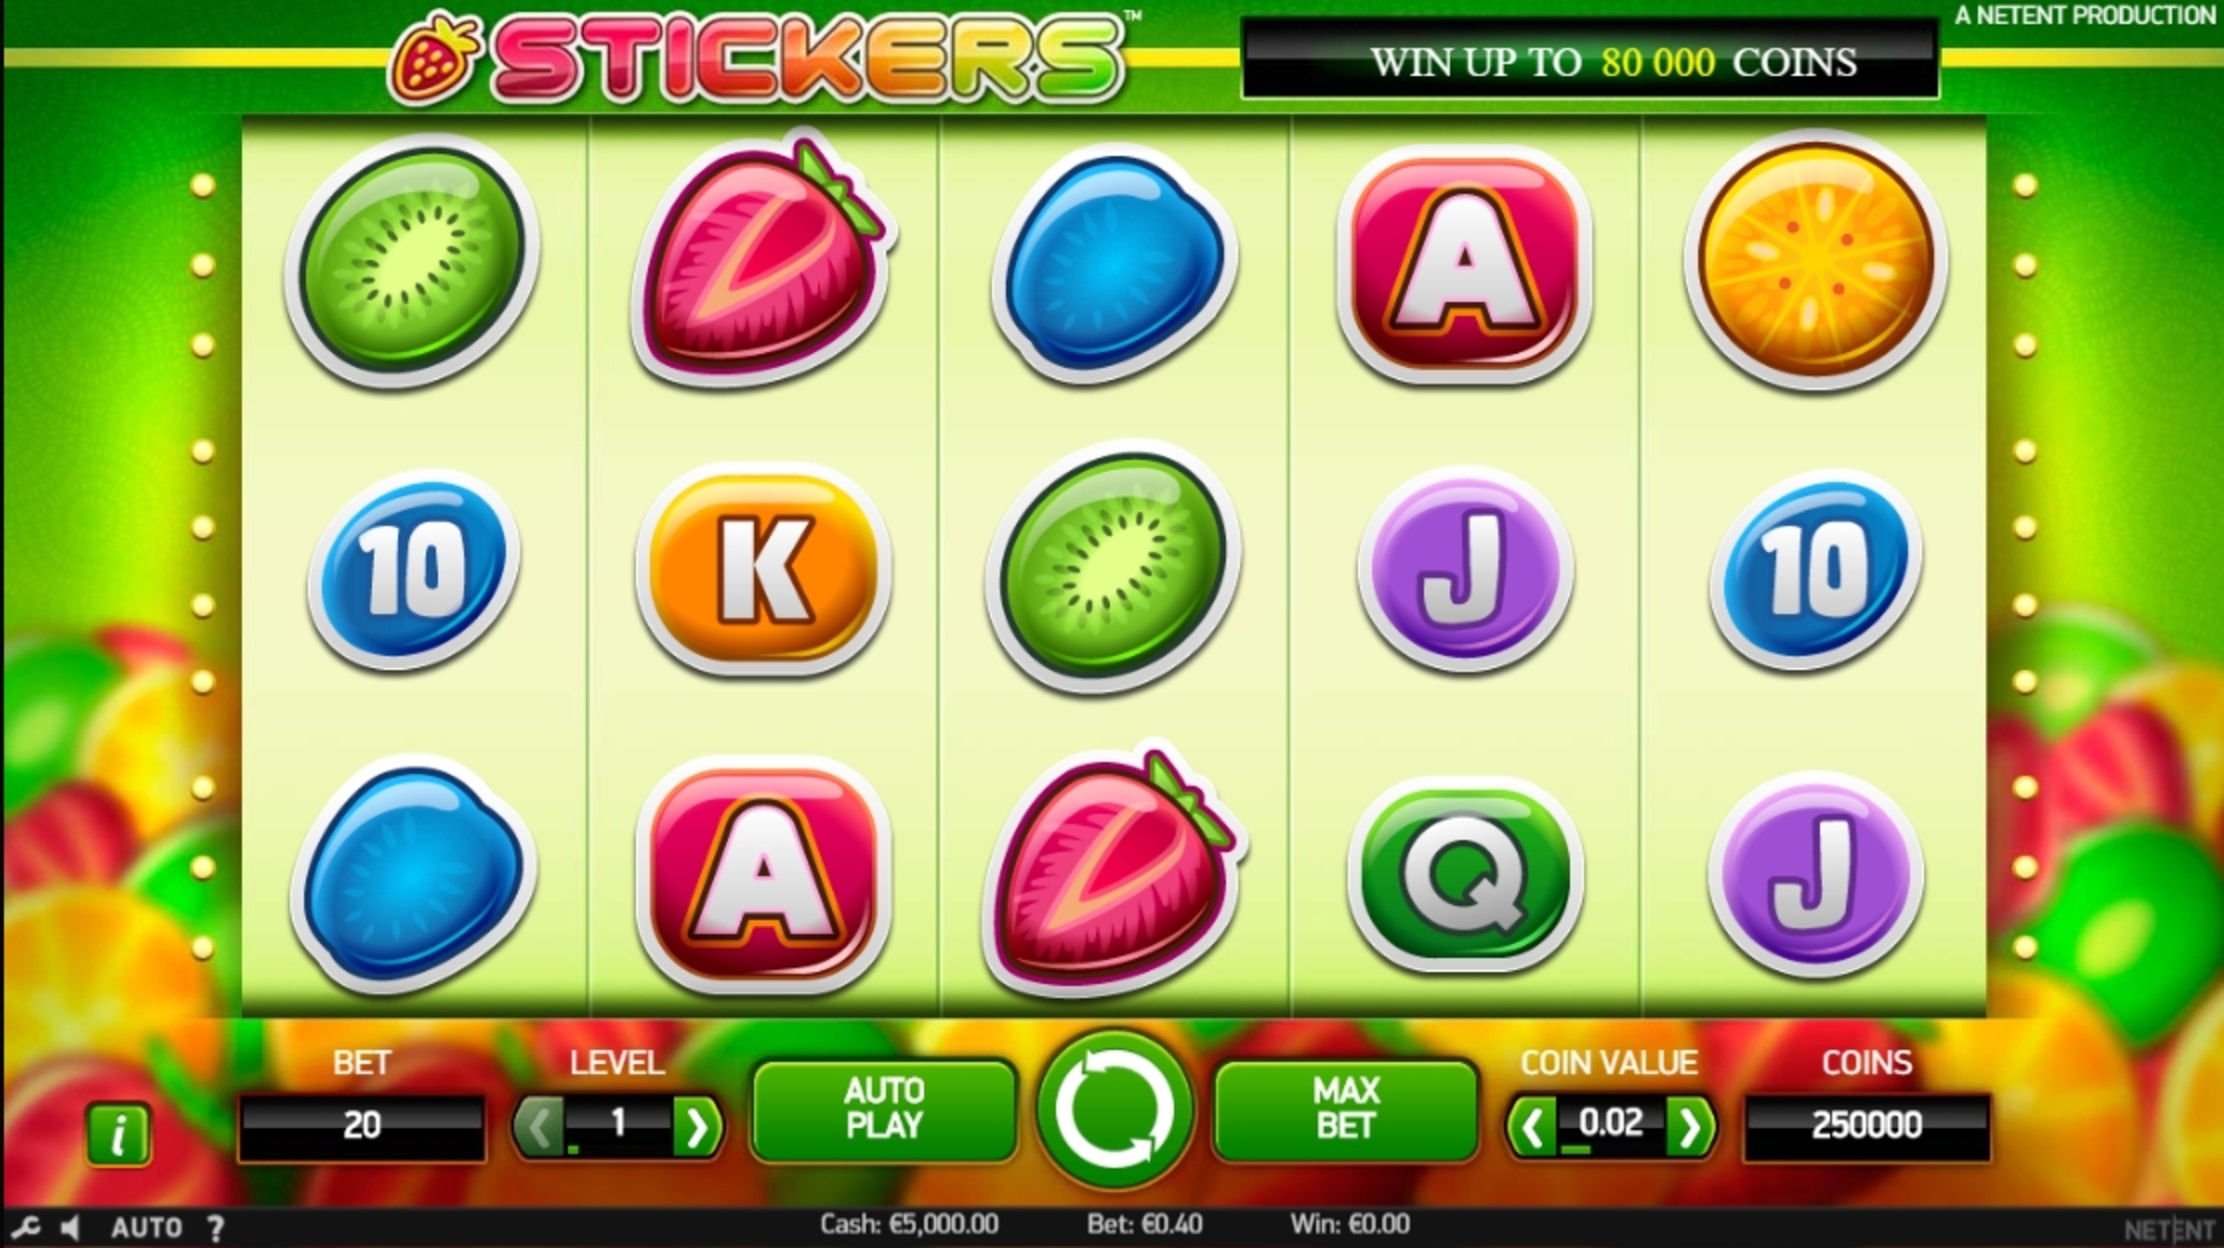 Reels in Stickers Slot Game by NetEnt